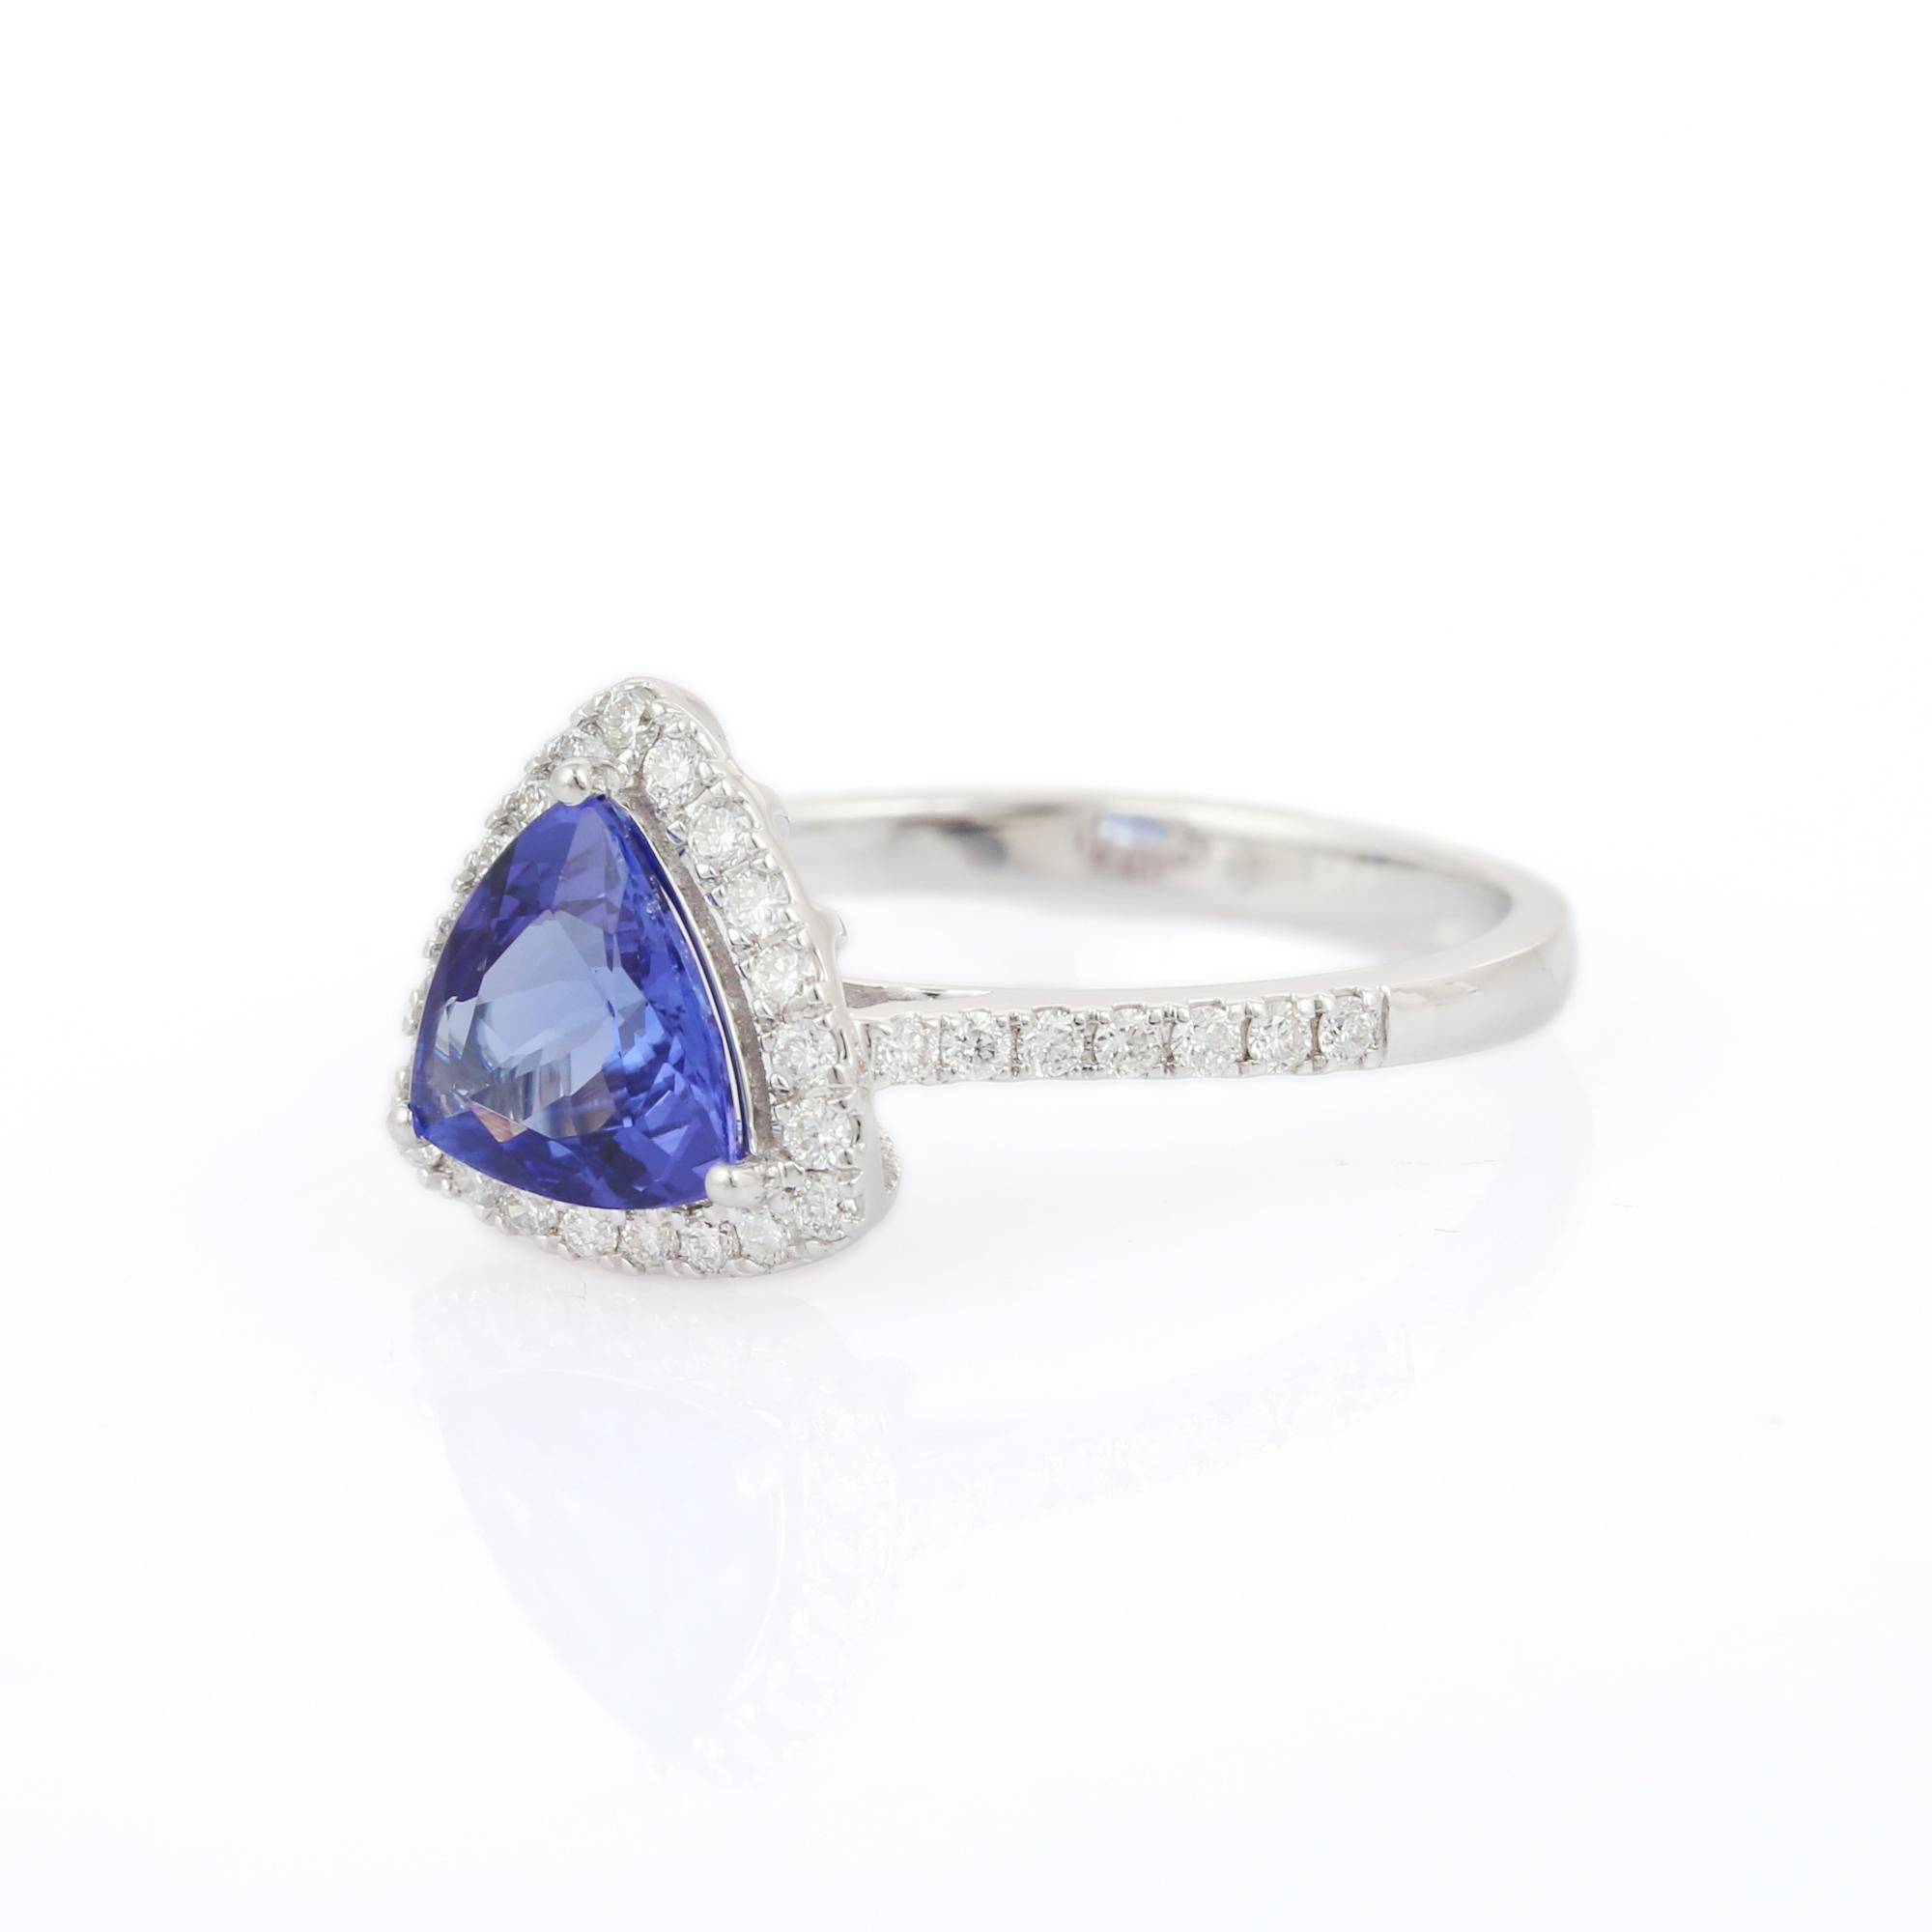 For Sale:  Natural Tanzanite Diamond Engagement Ring in 18k Solid White Gold 2